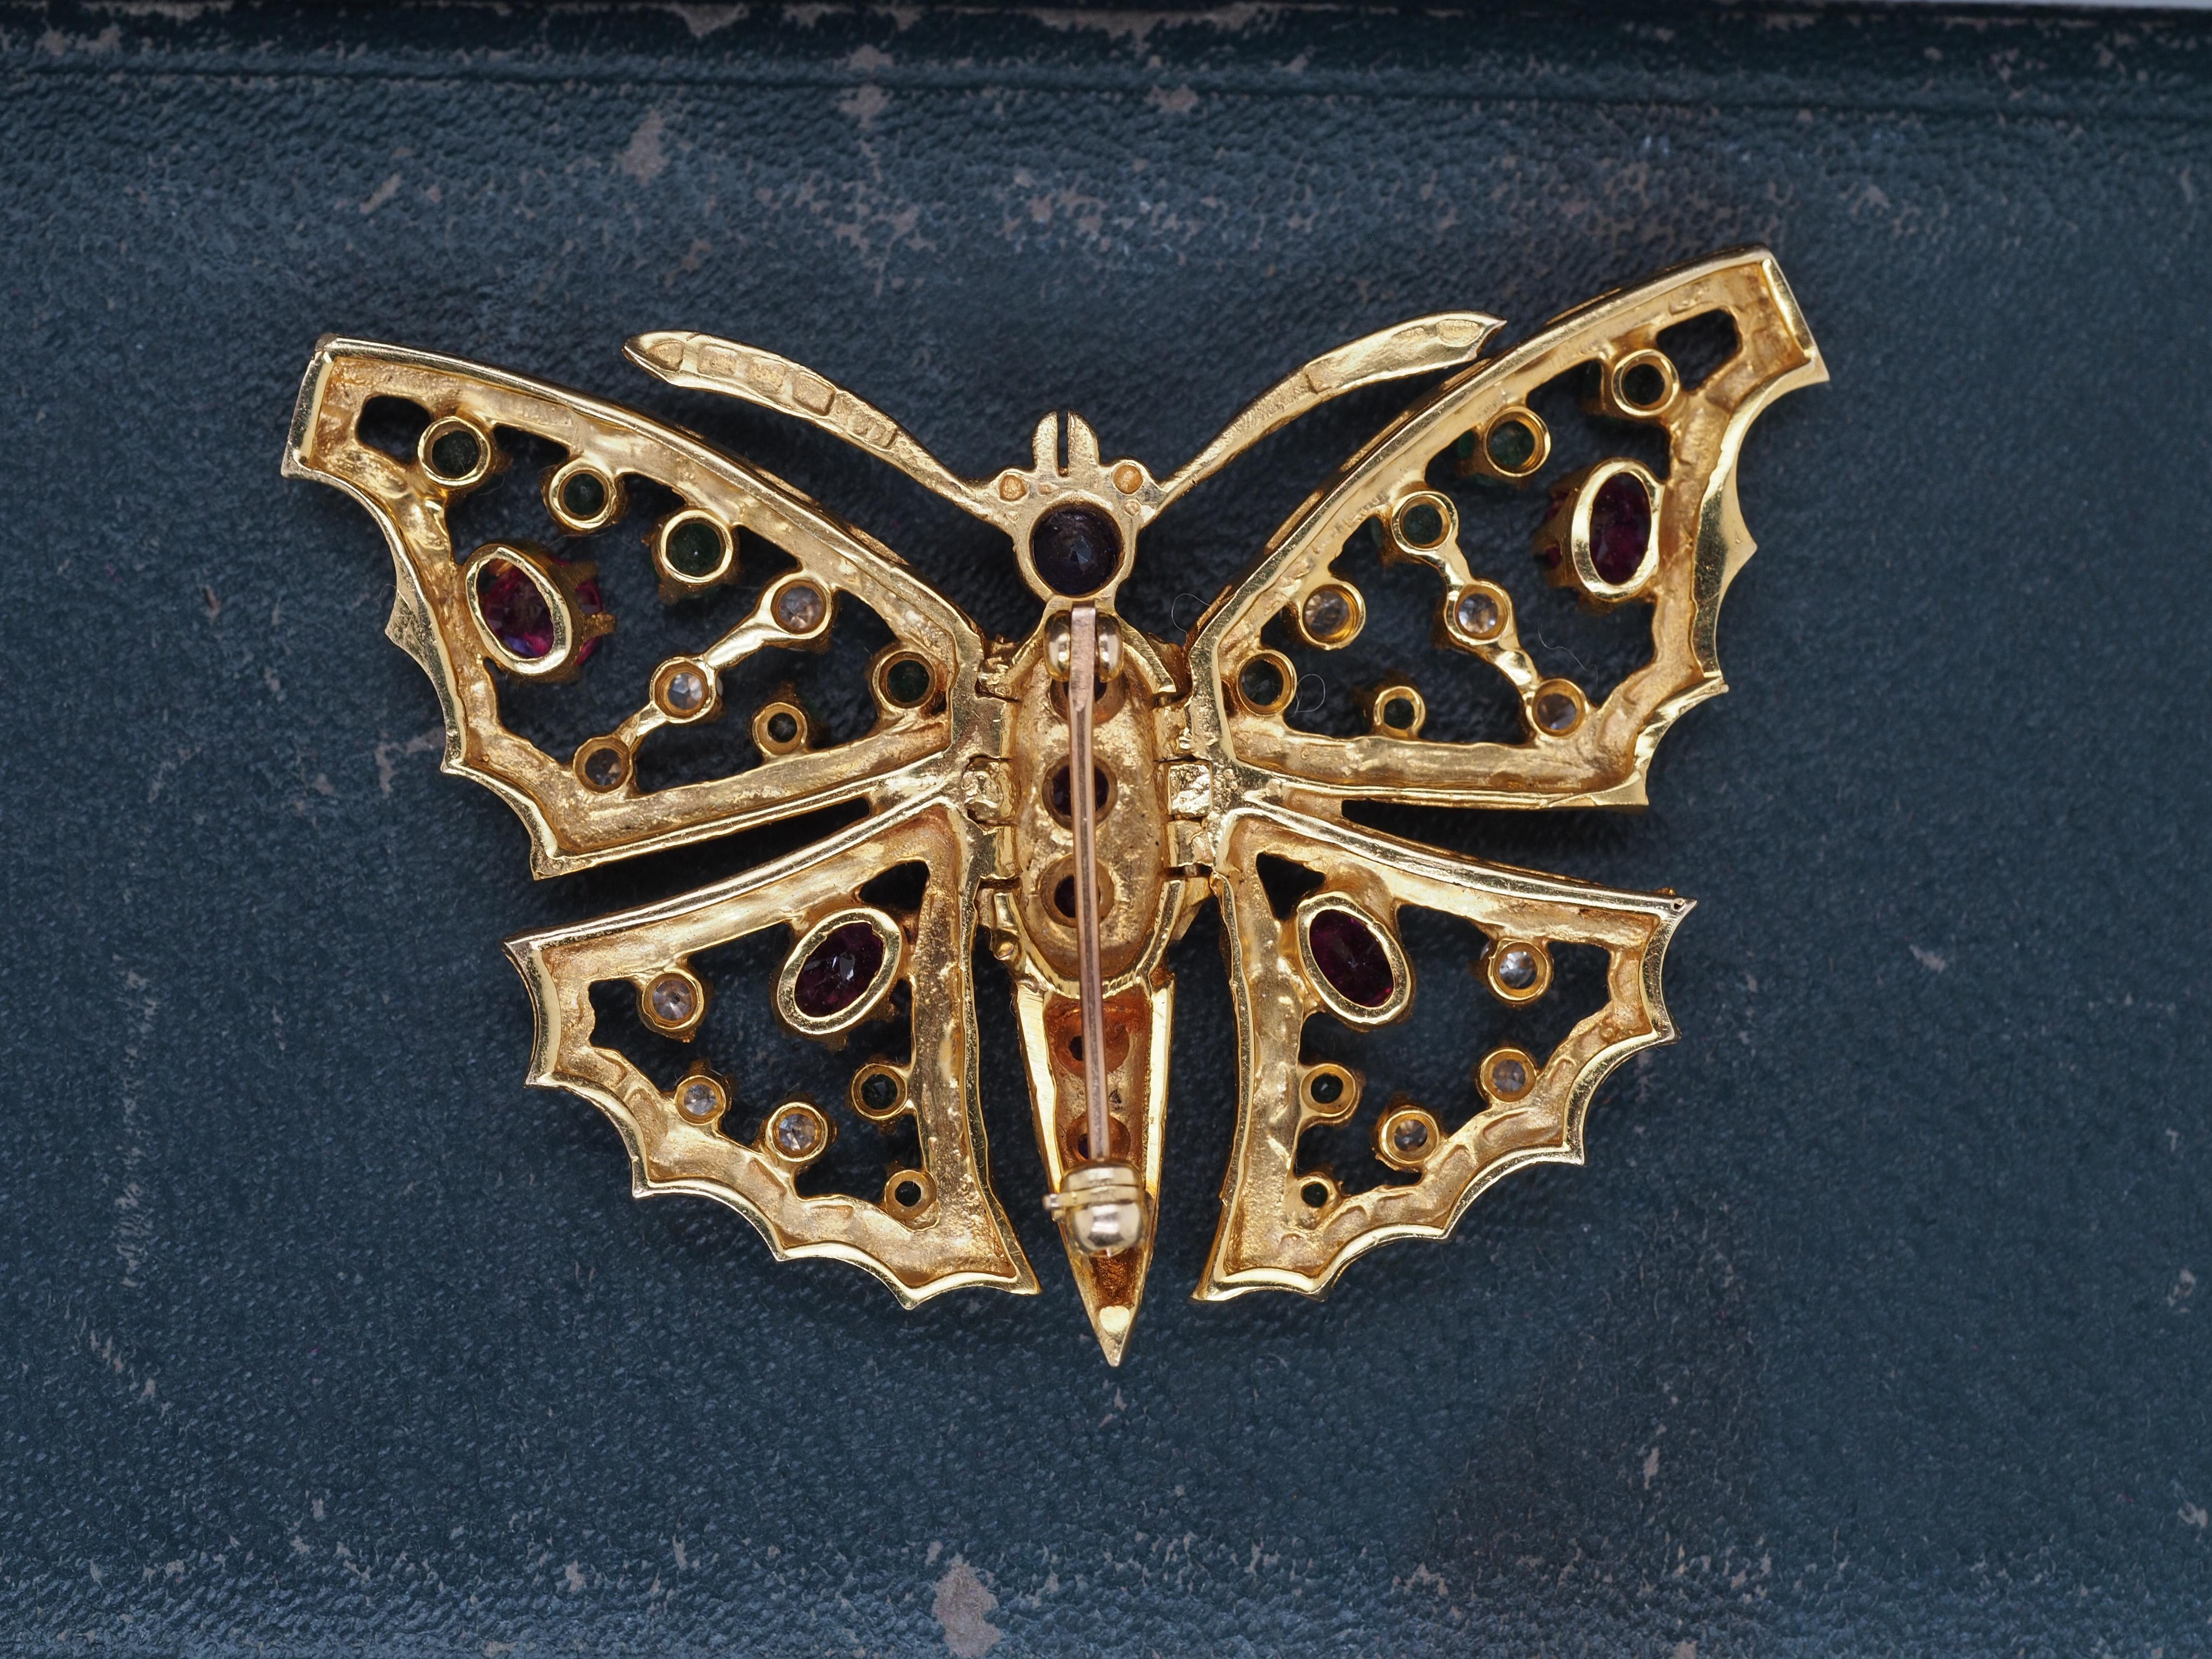 14K Yellow Gold Butterfly Brooch with Hinged Wings and Diamonds, Rubies, Emerald In Good Condition For Sale In Atlanta, GA